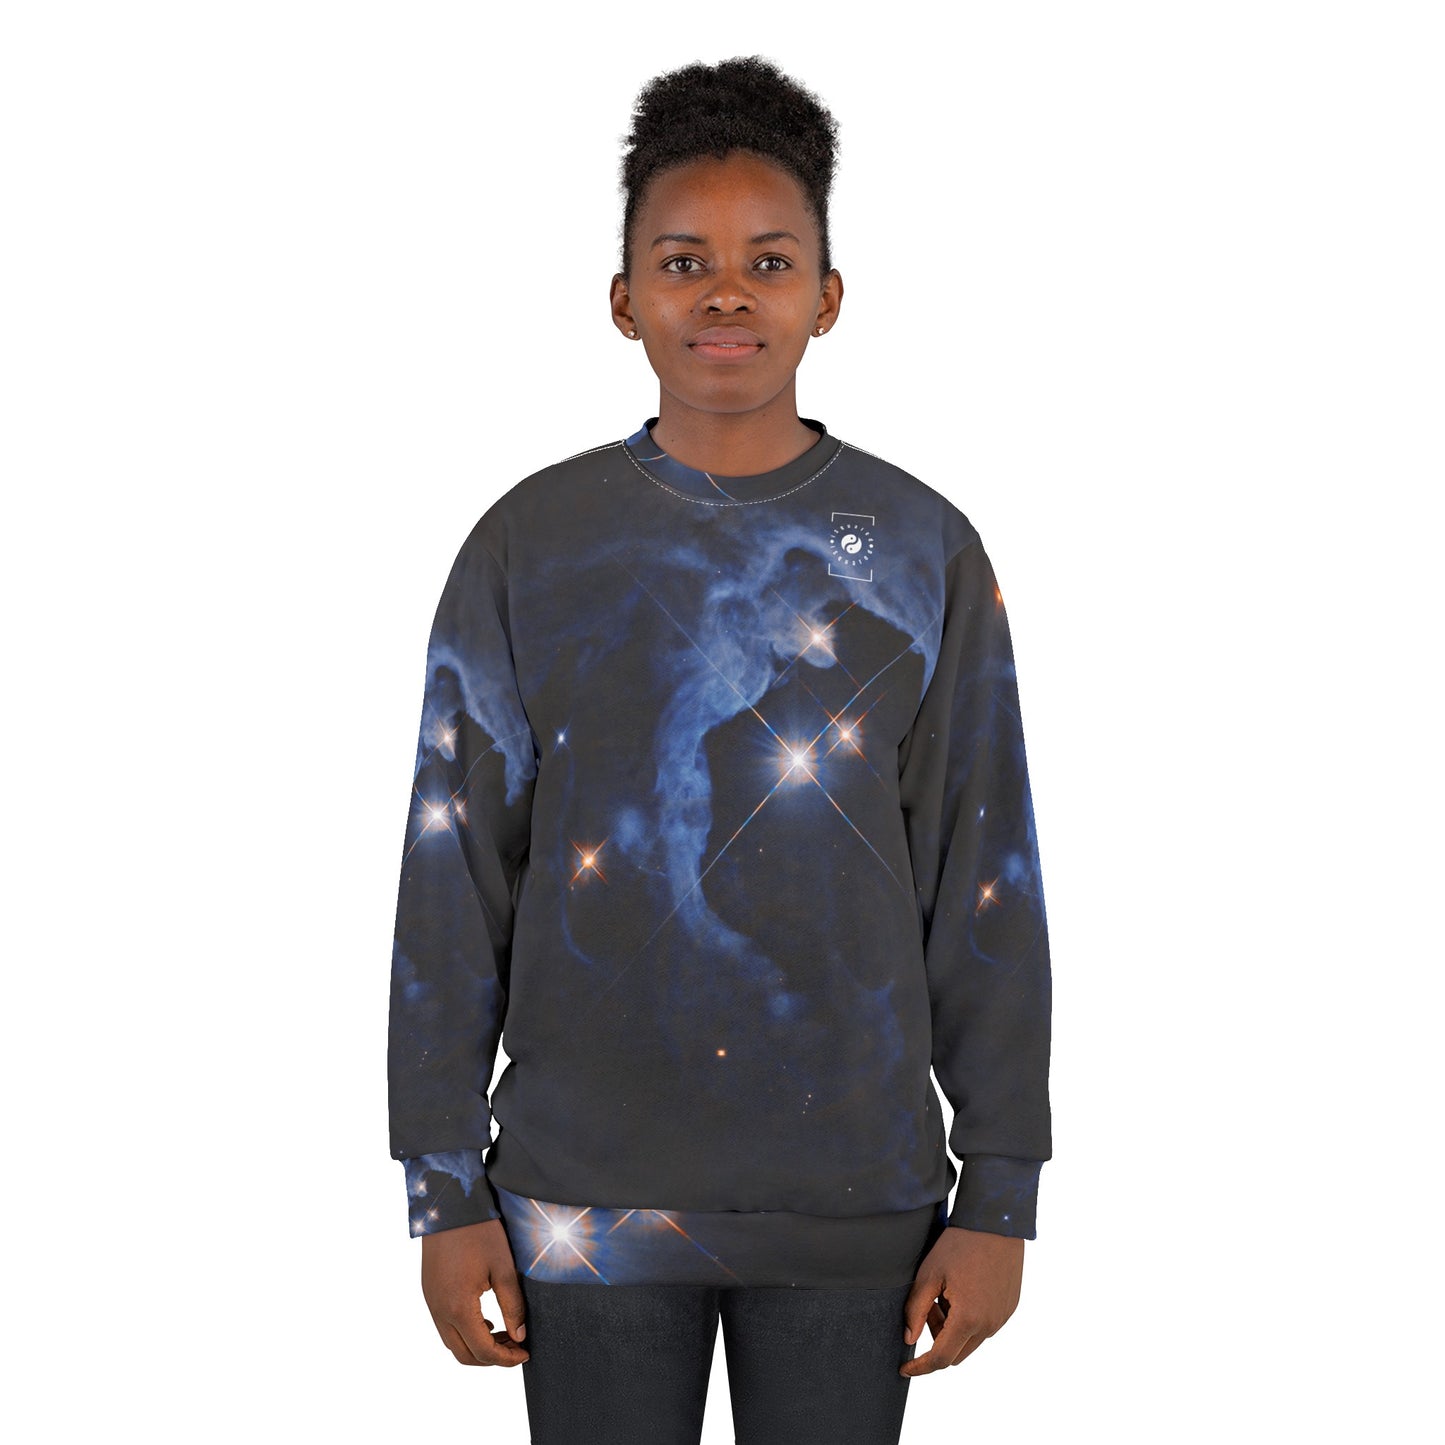 HP Tau, HP Tau G2, and G3 3 star system captured by Hubble - Unisex Sweatshirt